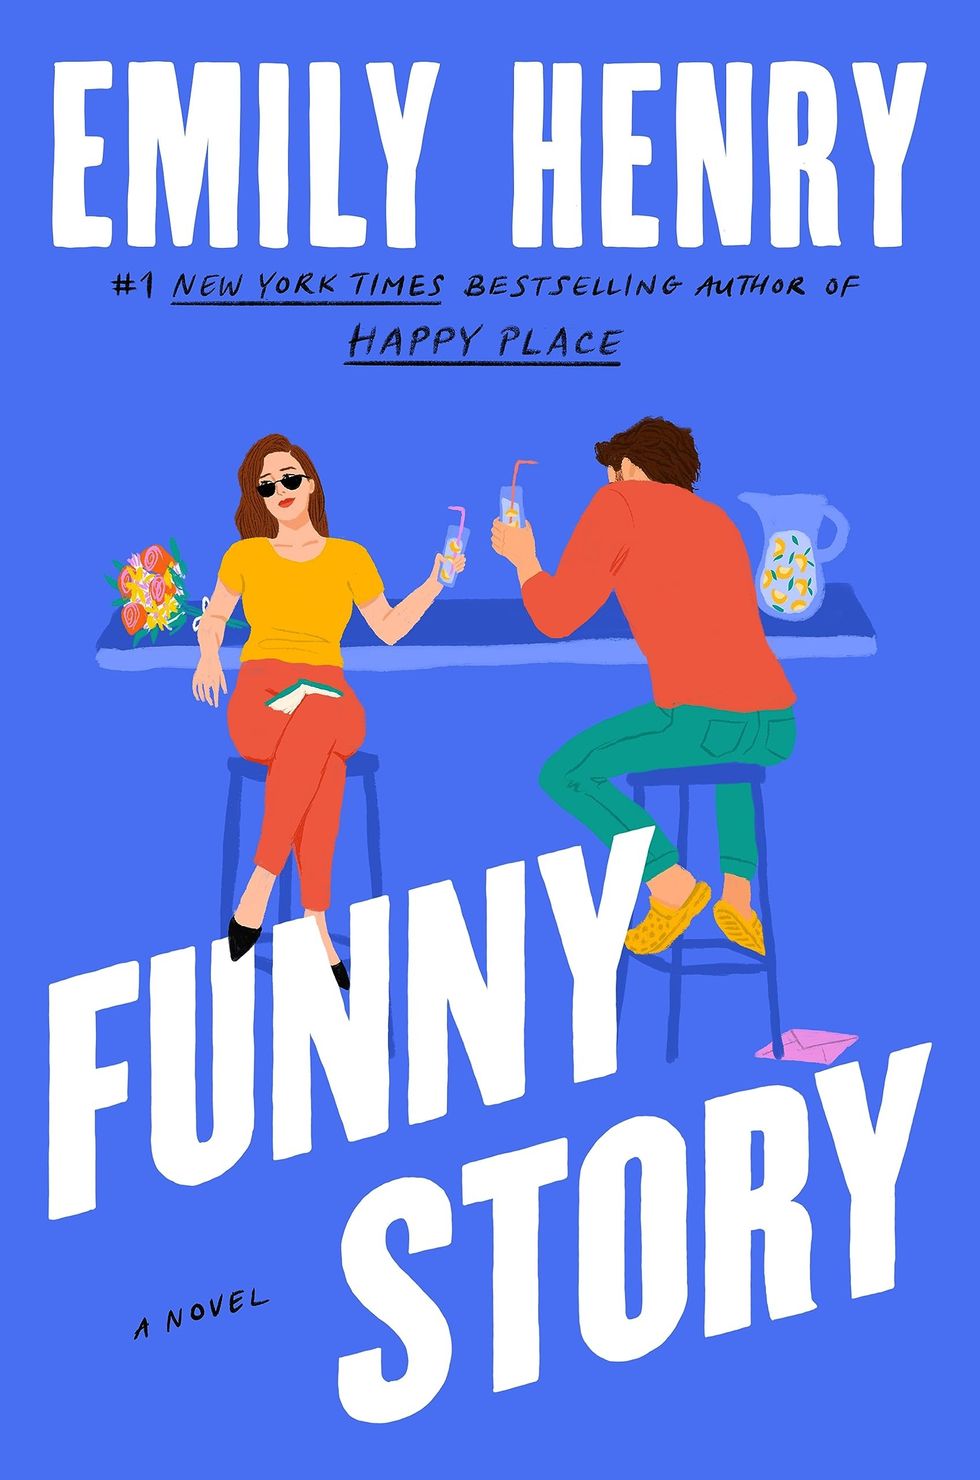 Here's Everything We Know About Emily Henry's New Book 